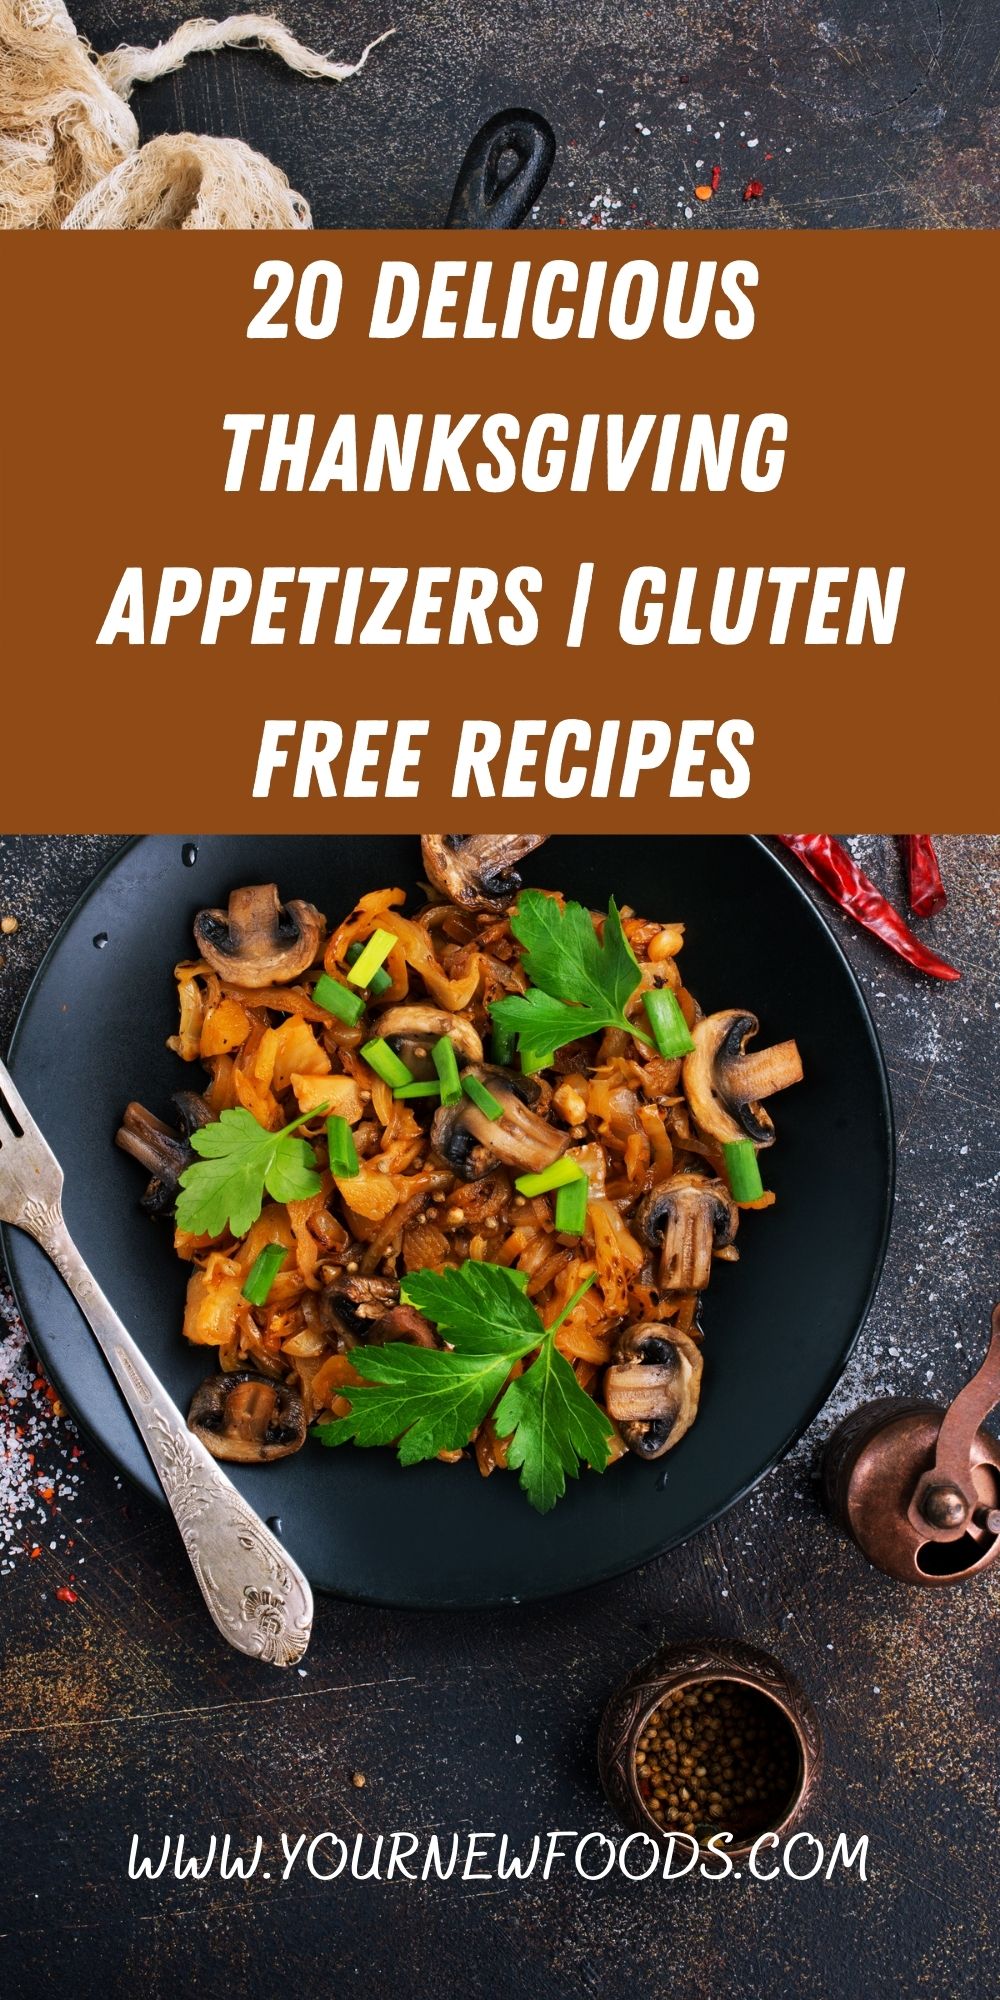 Sauted mushrooms gluten free appetizers for thannksgiving